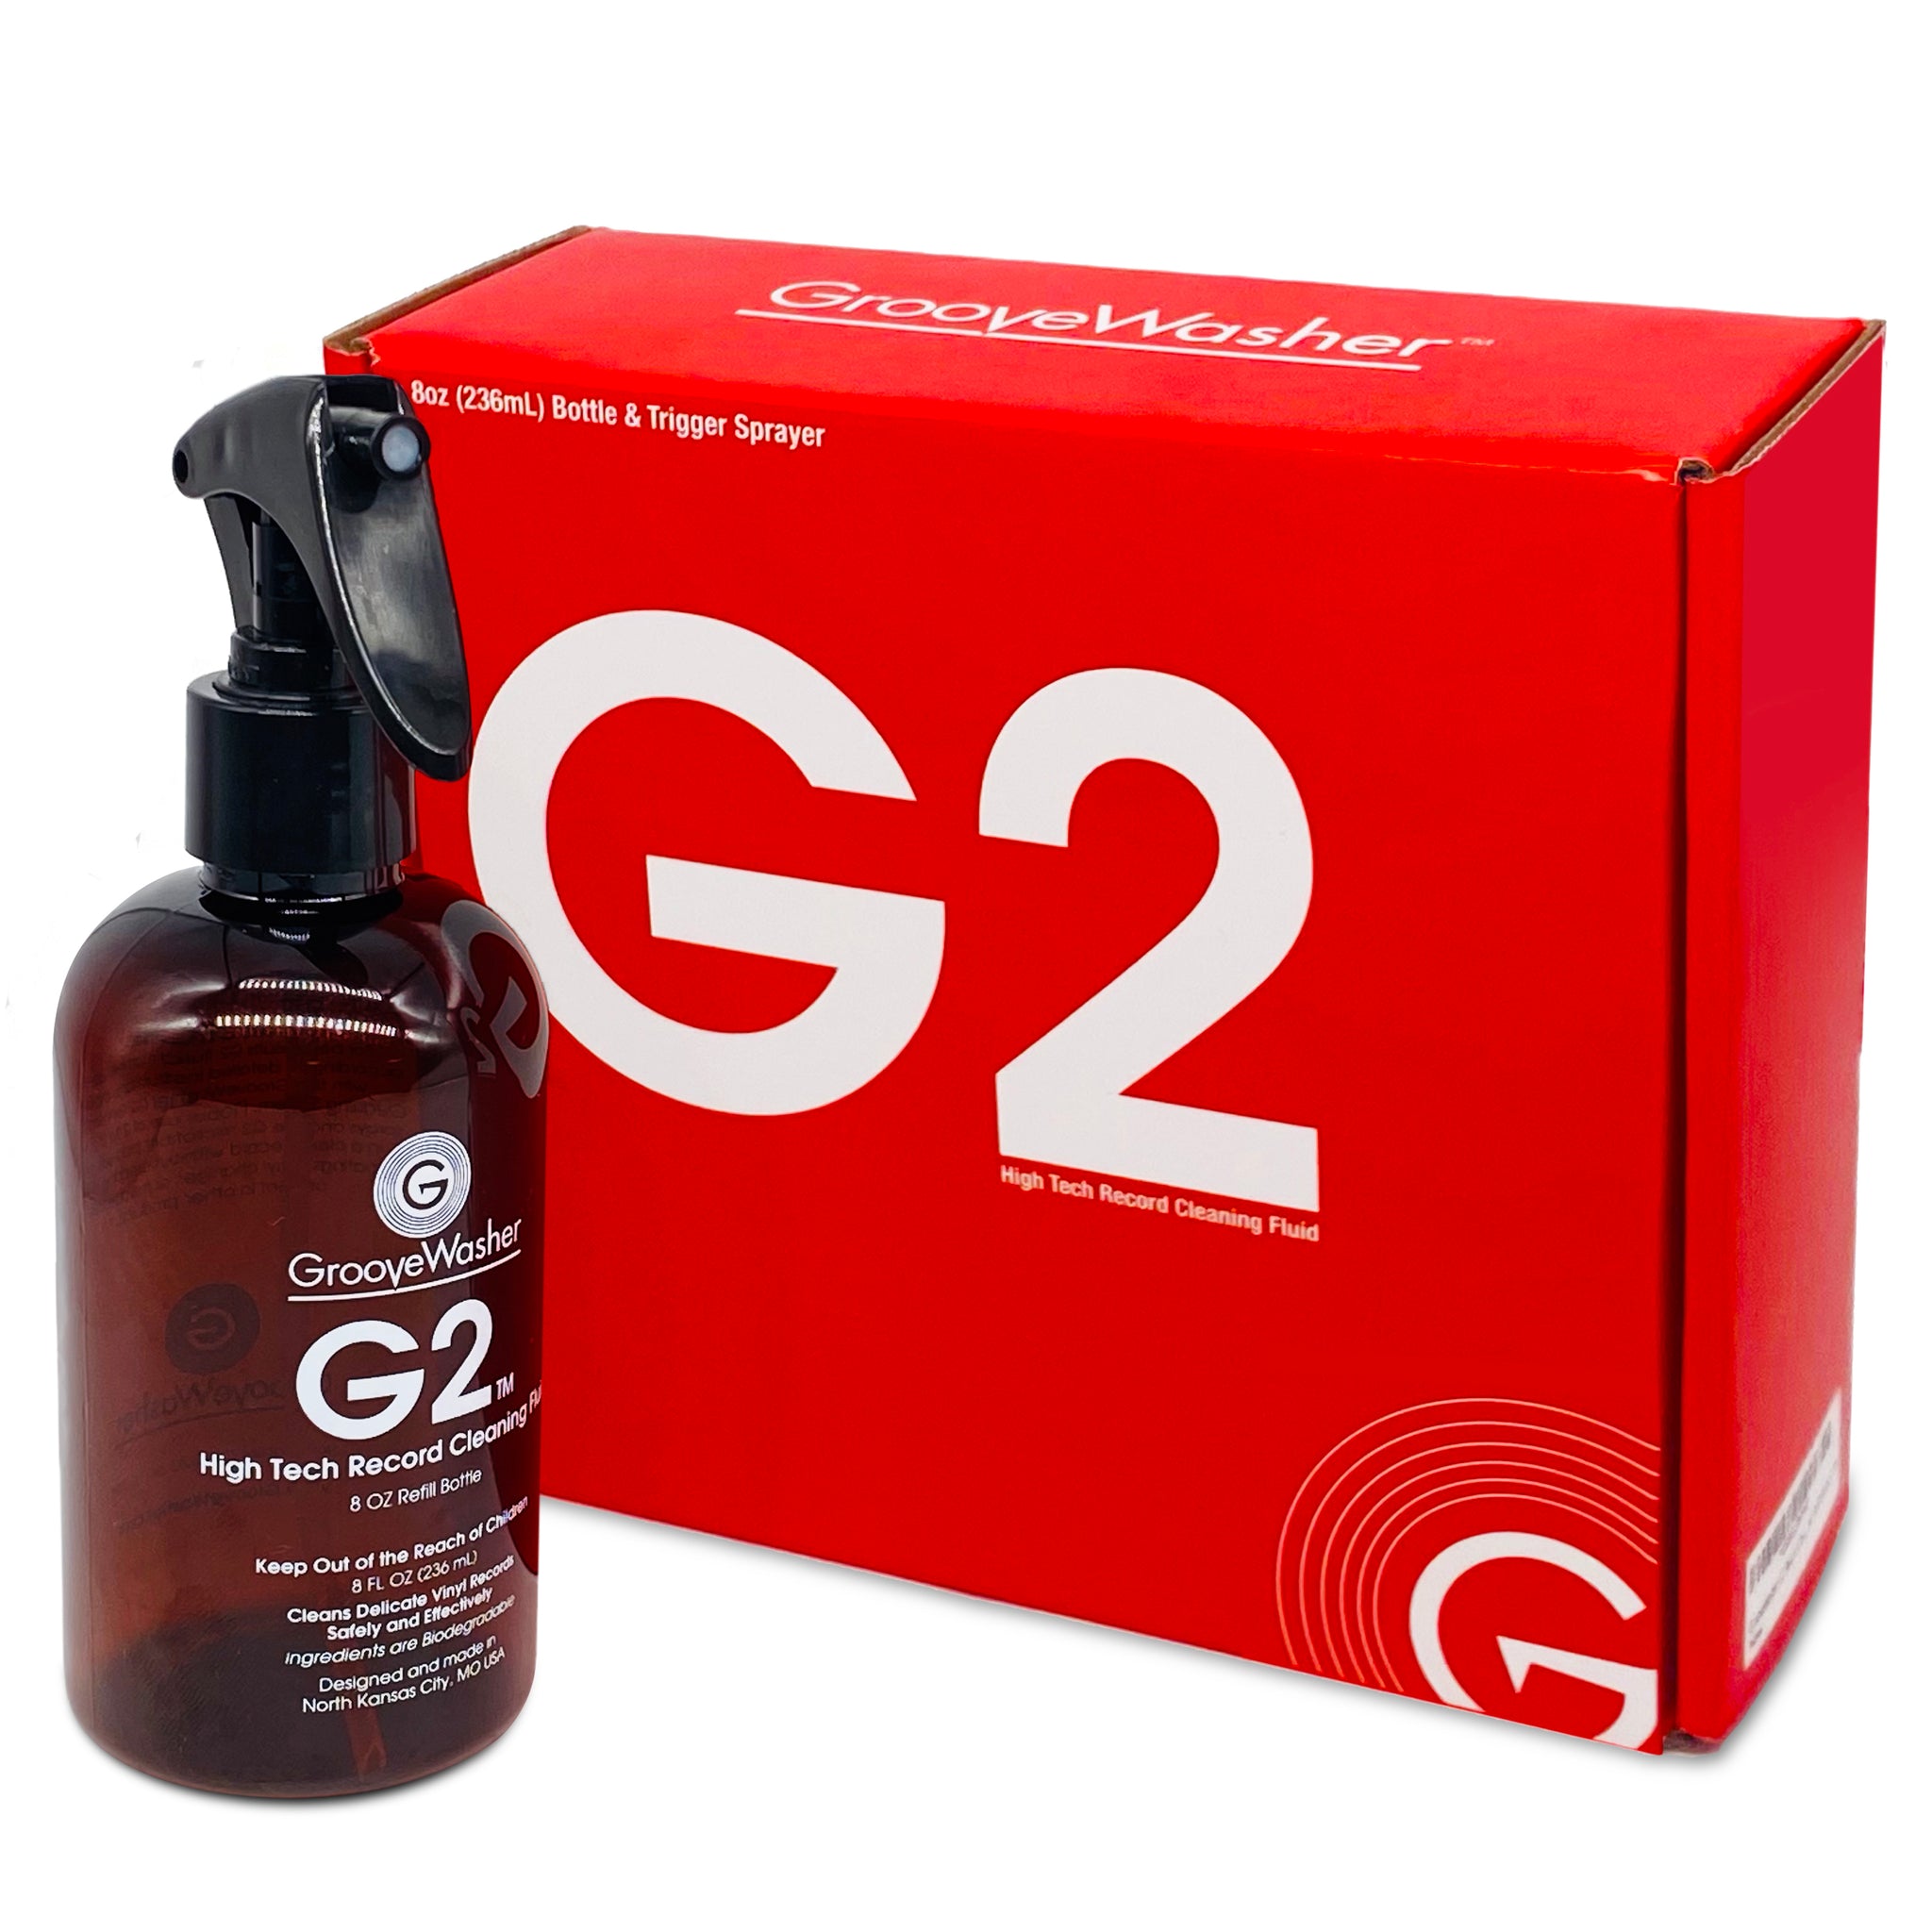 G2 Record Cleaning Fluid - 8oz Bottle